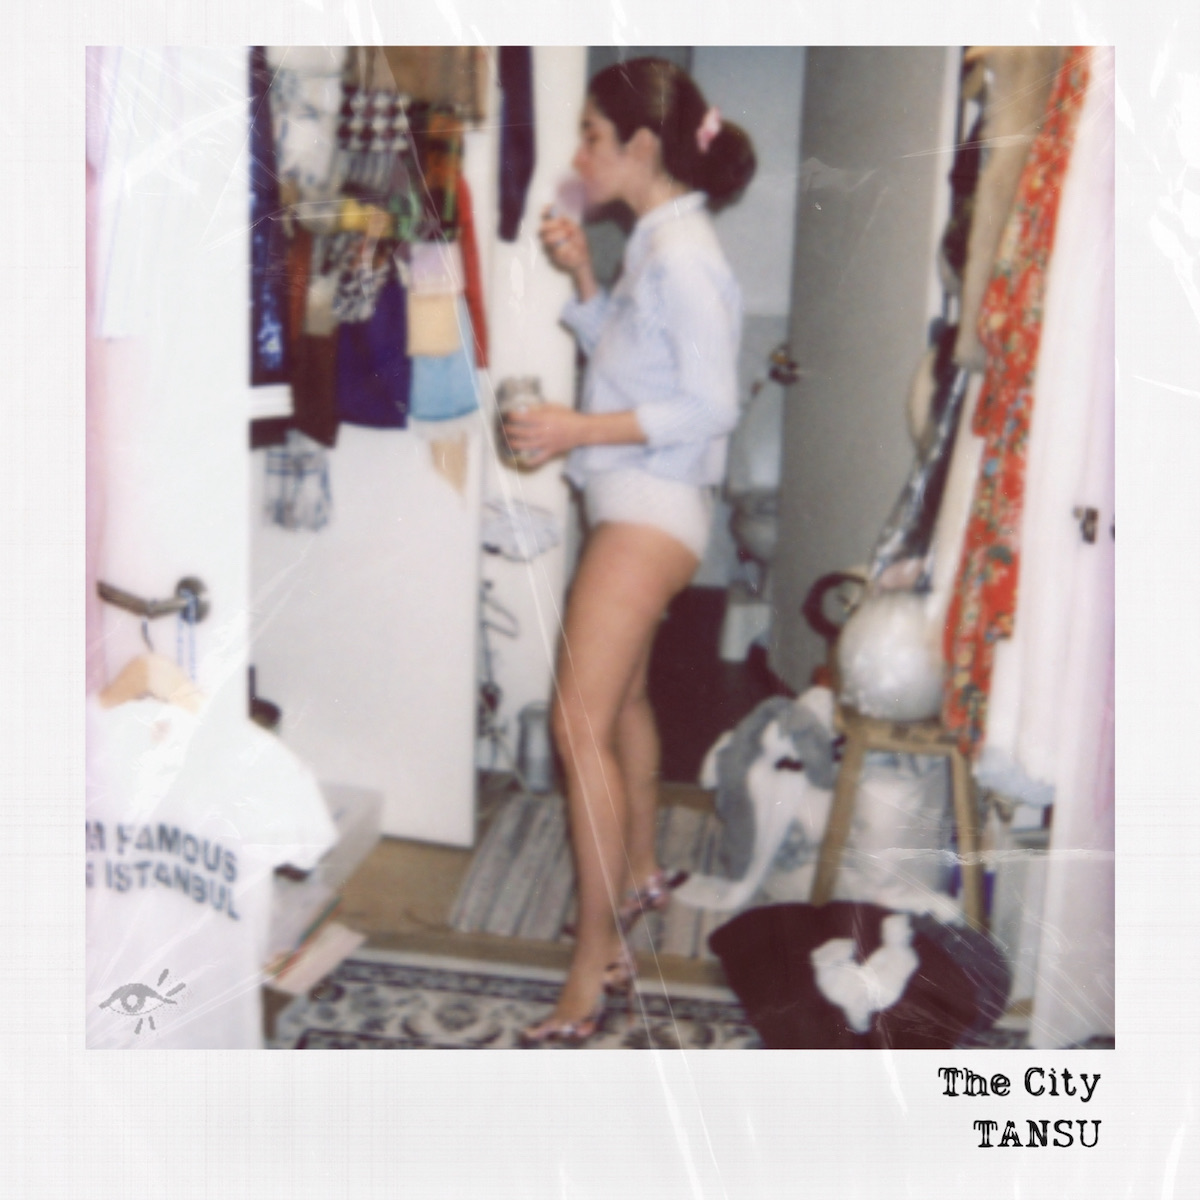 DEBUT EP REVIEW: The City by Tansu